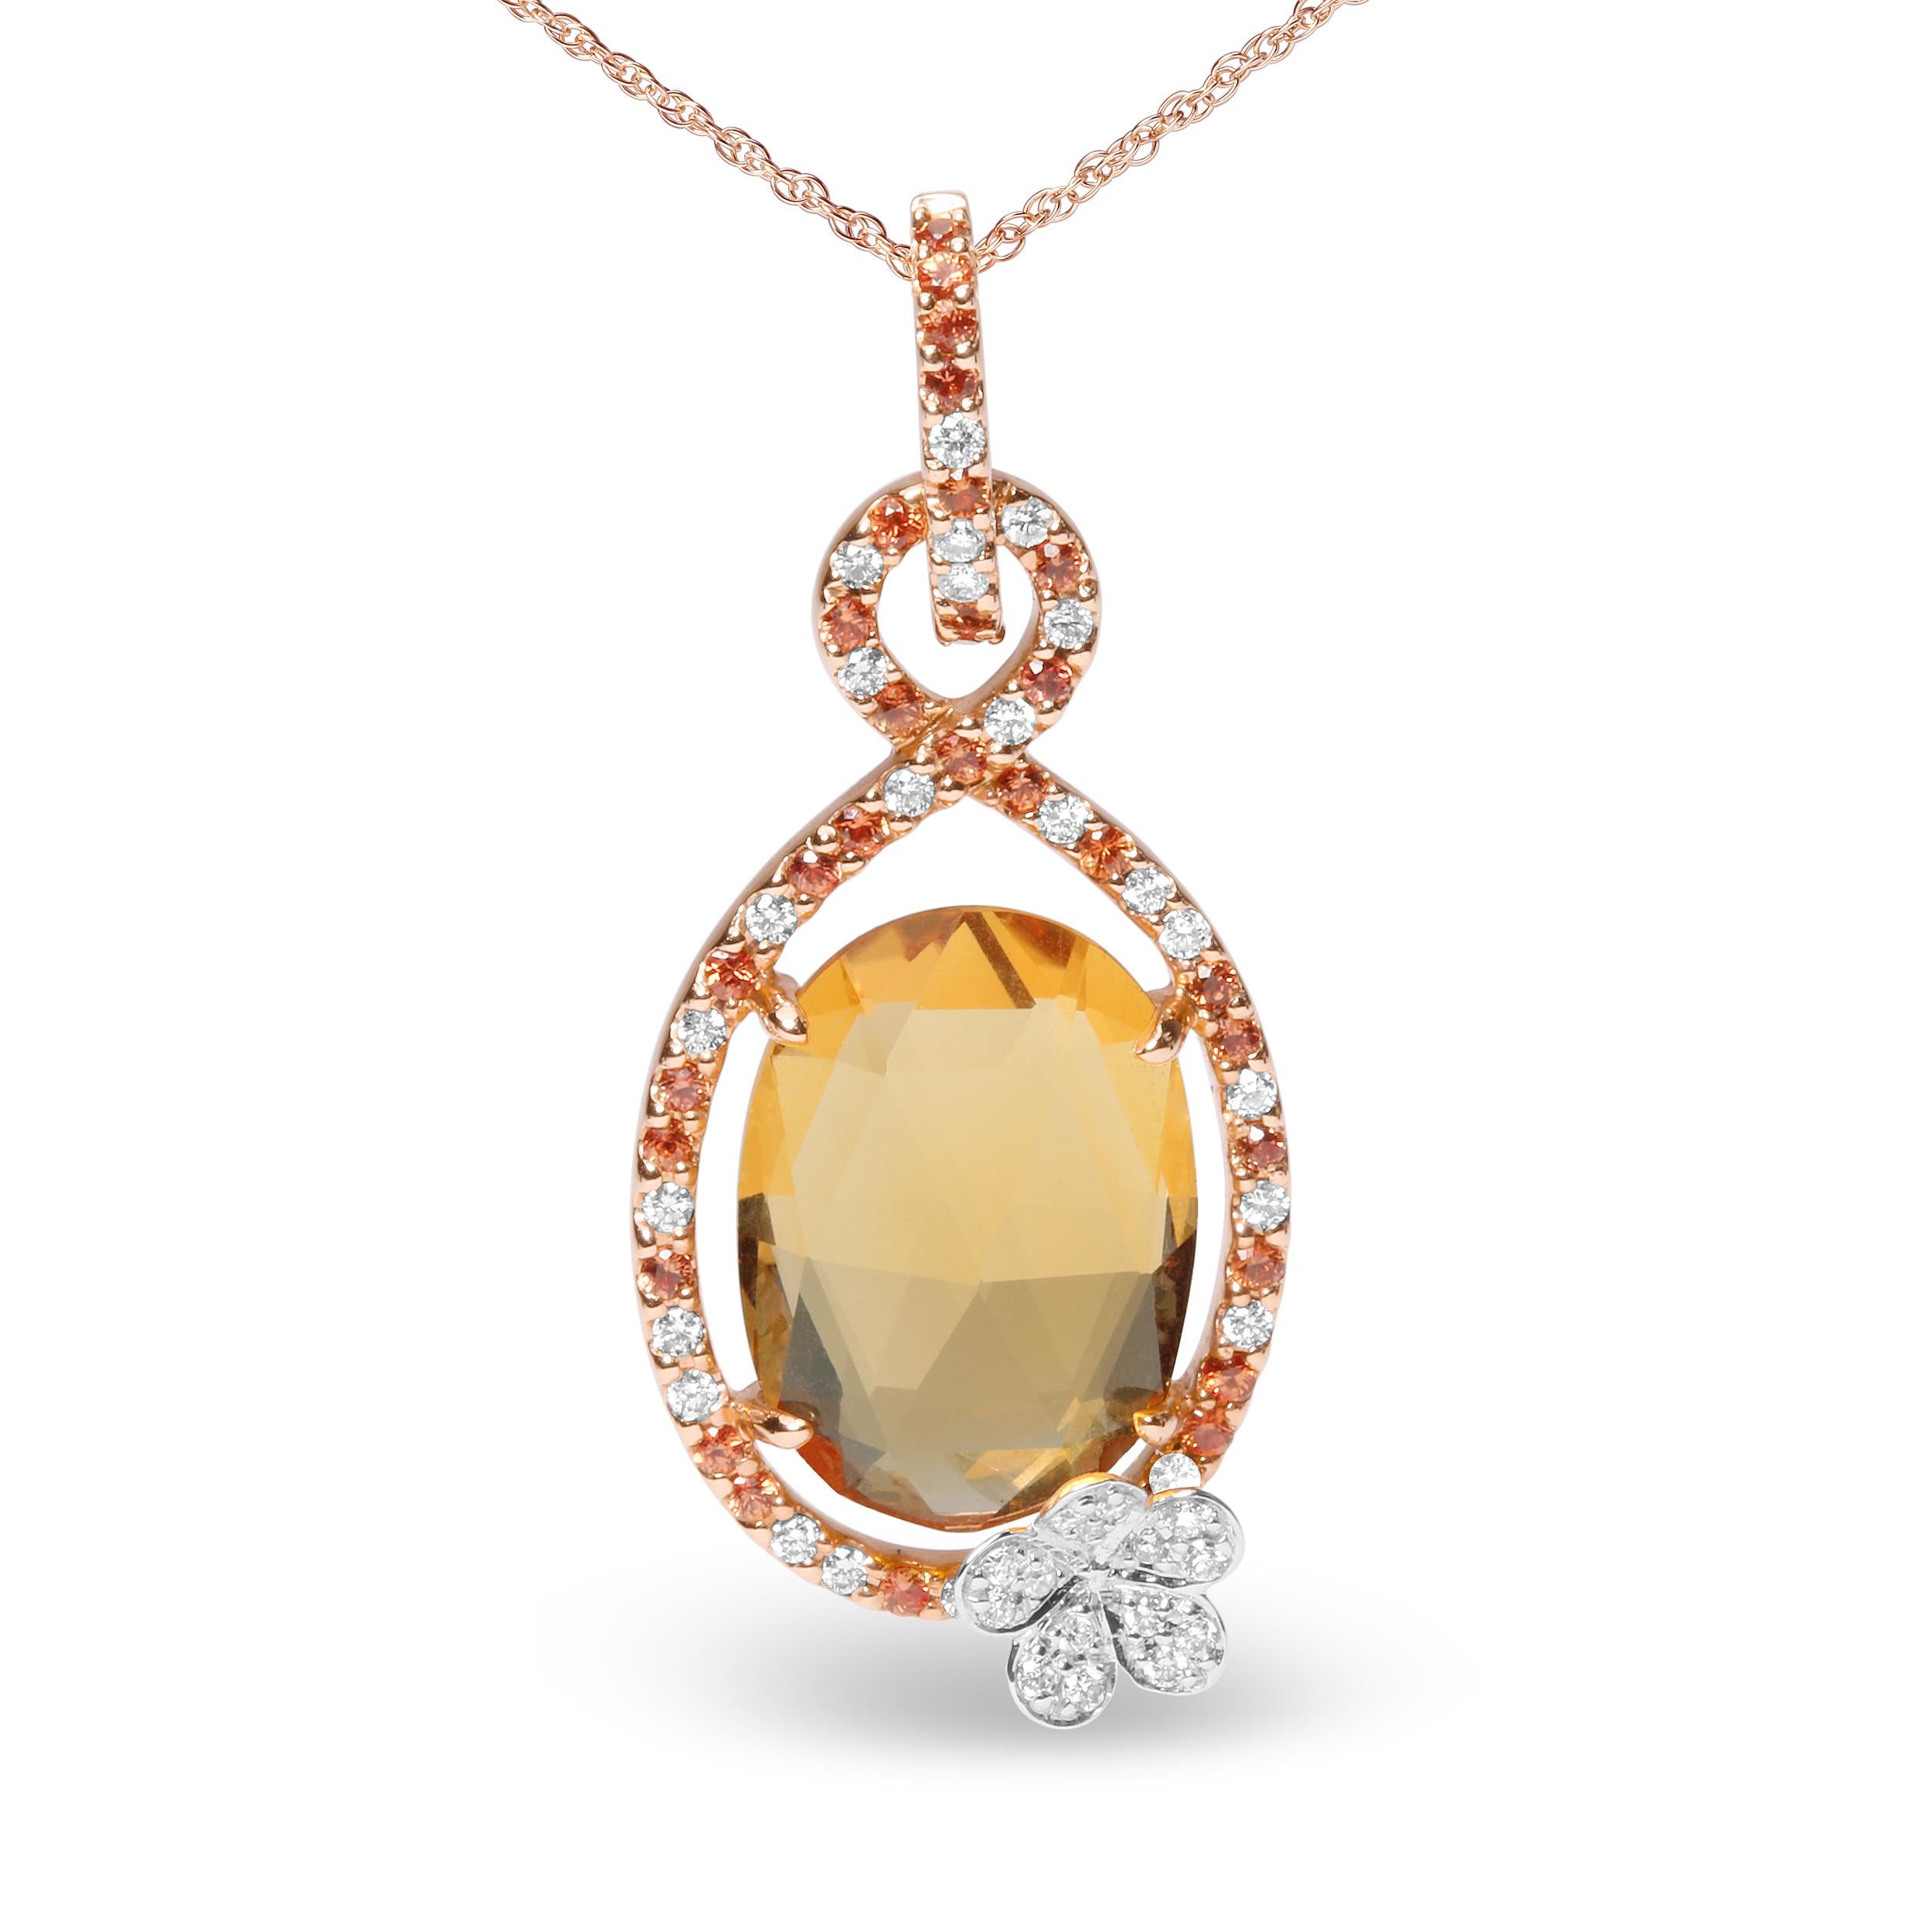 In a halo teardrop motif of genuine 18k rose gold, this pendant necklace makes an awe-inspiring impression comprised of natural gemstones and diamonds. At the center rests a 15x10mm oval heat-treated yellow citrine in a 4-prong setting. An openwork